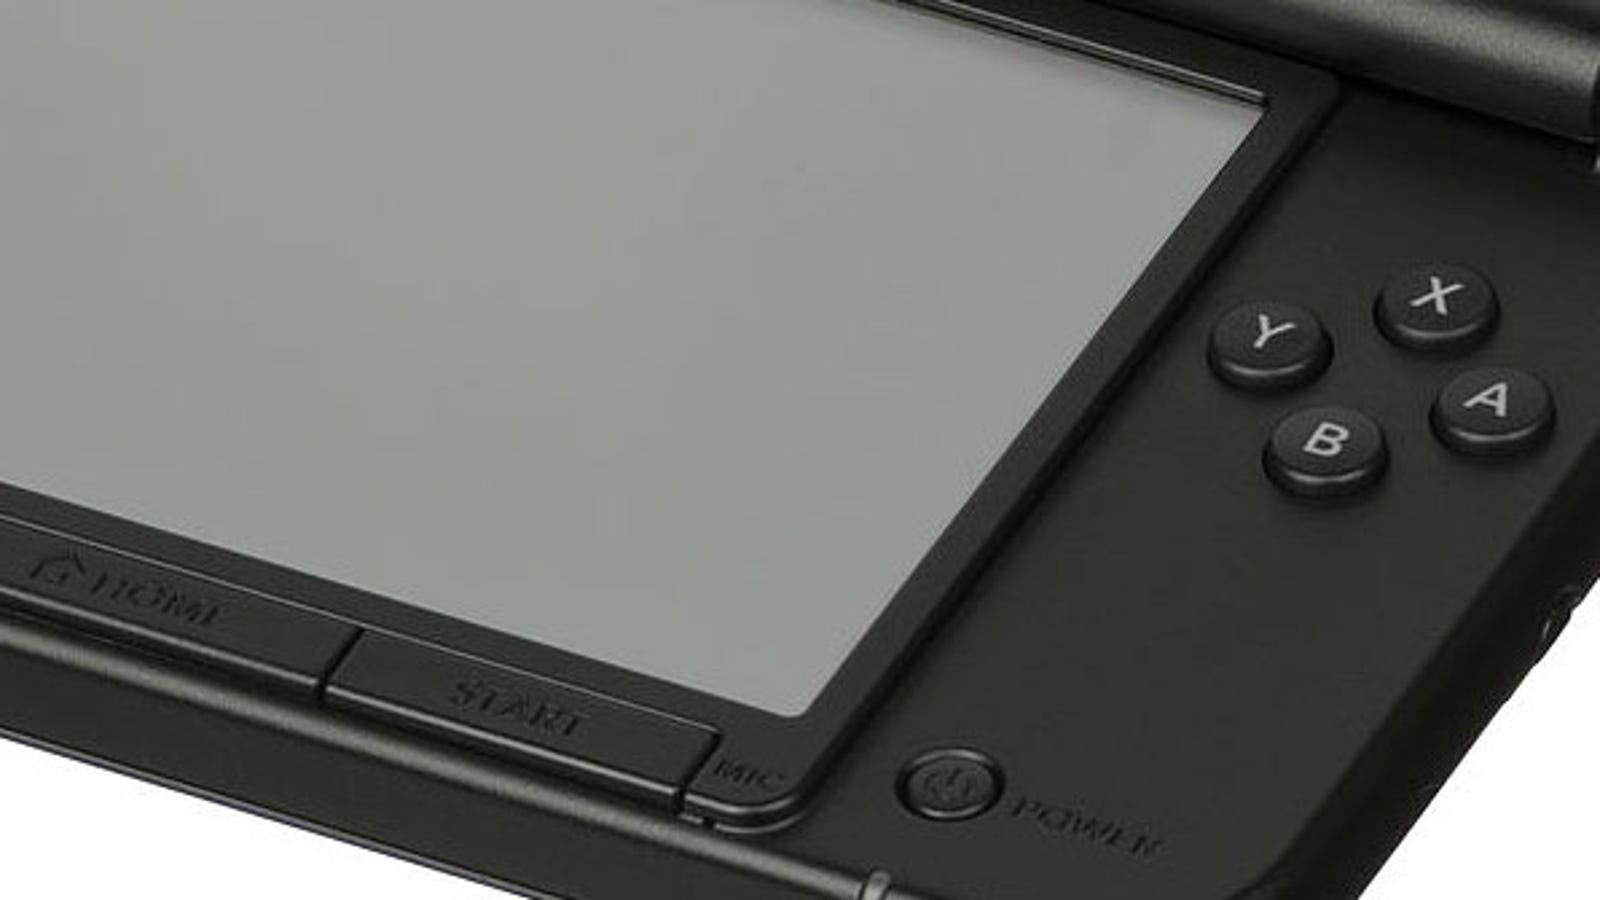 how to play rom hacks on 3ds on custom firmware